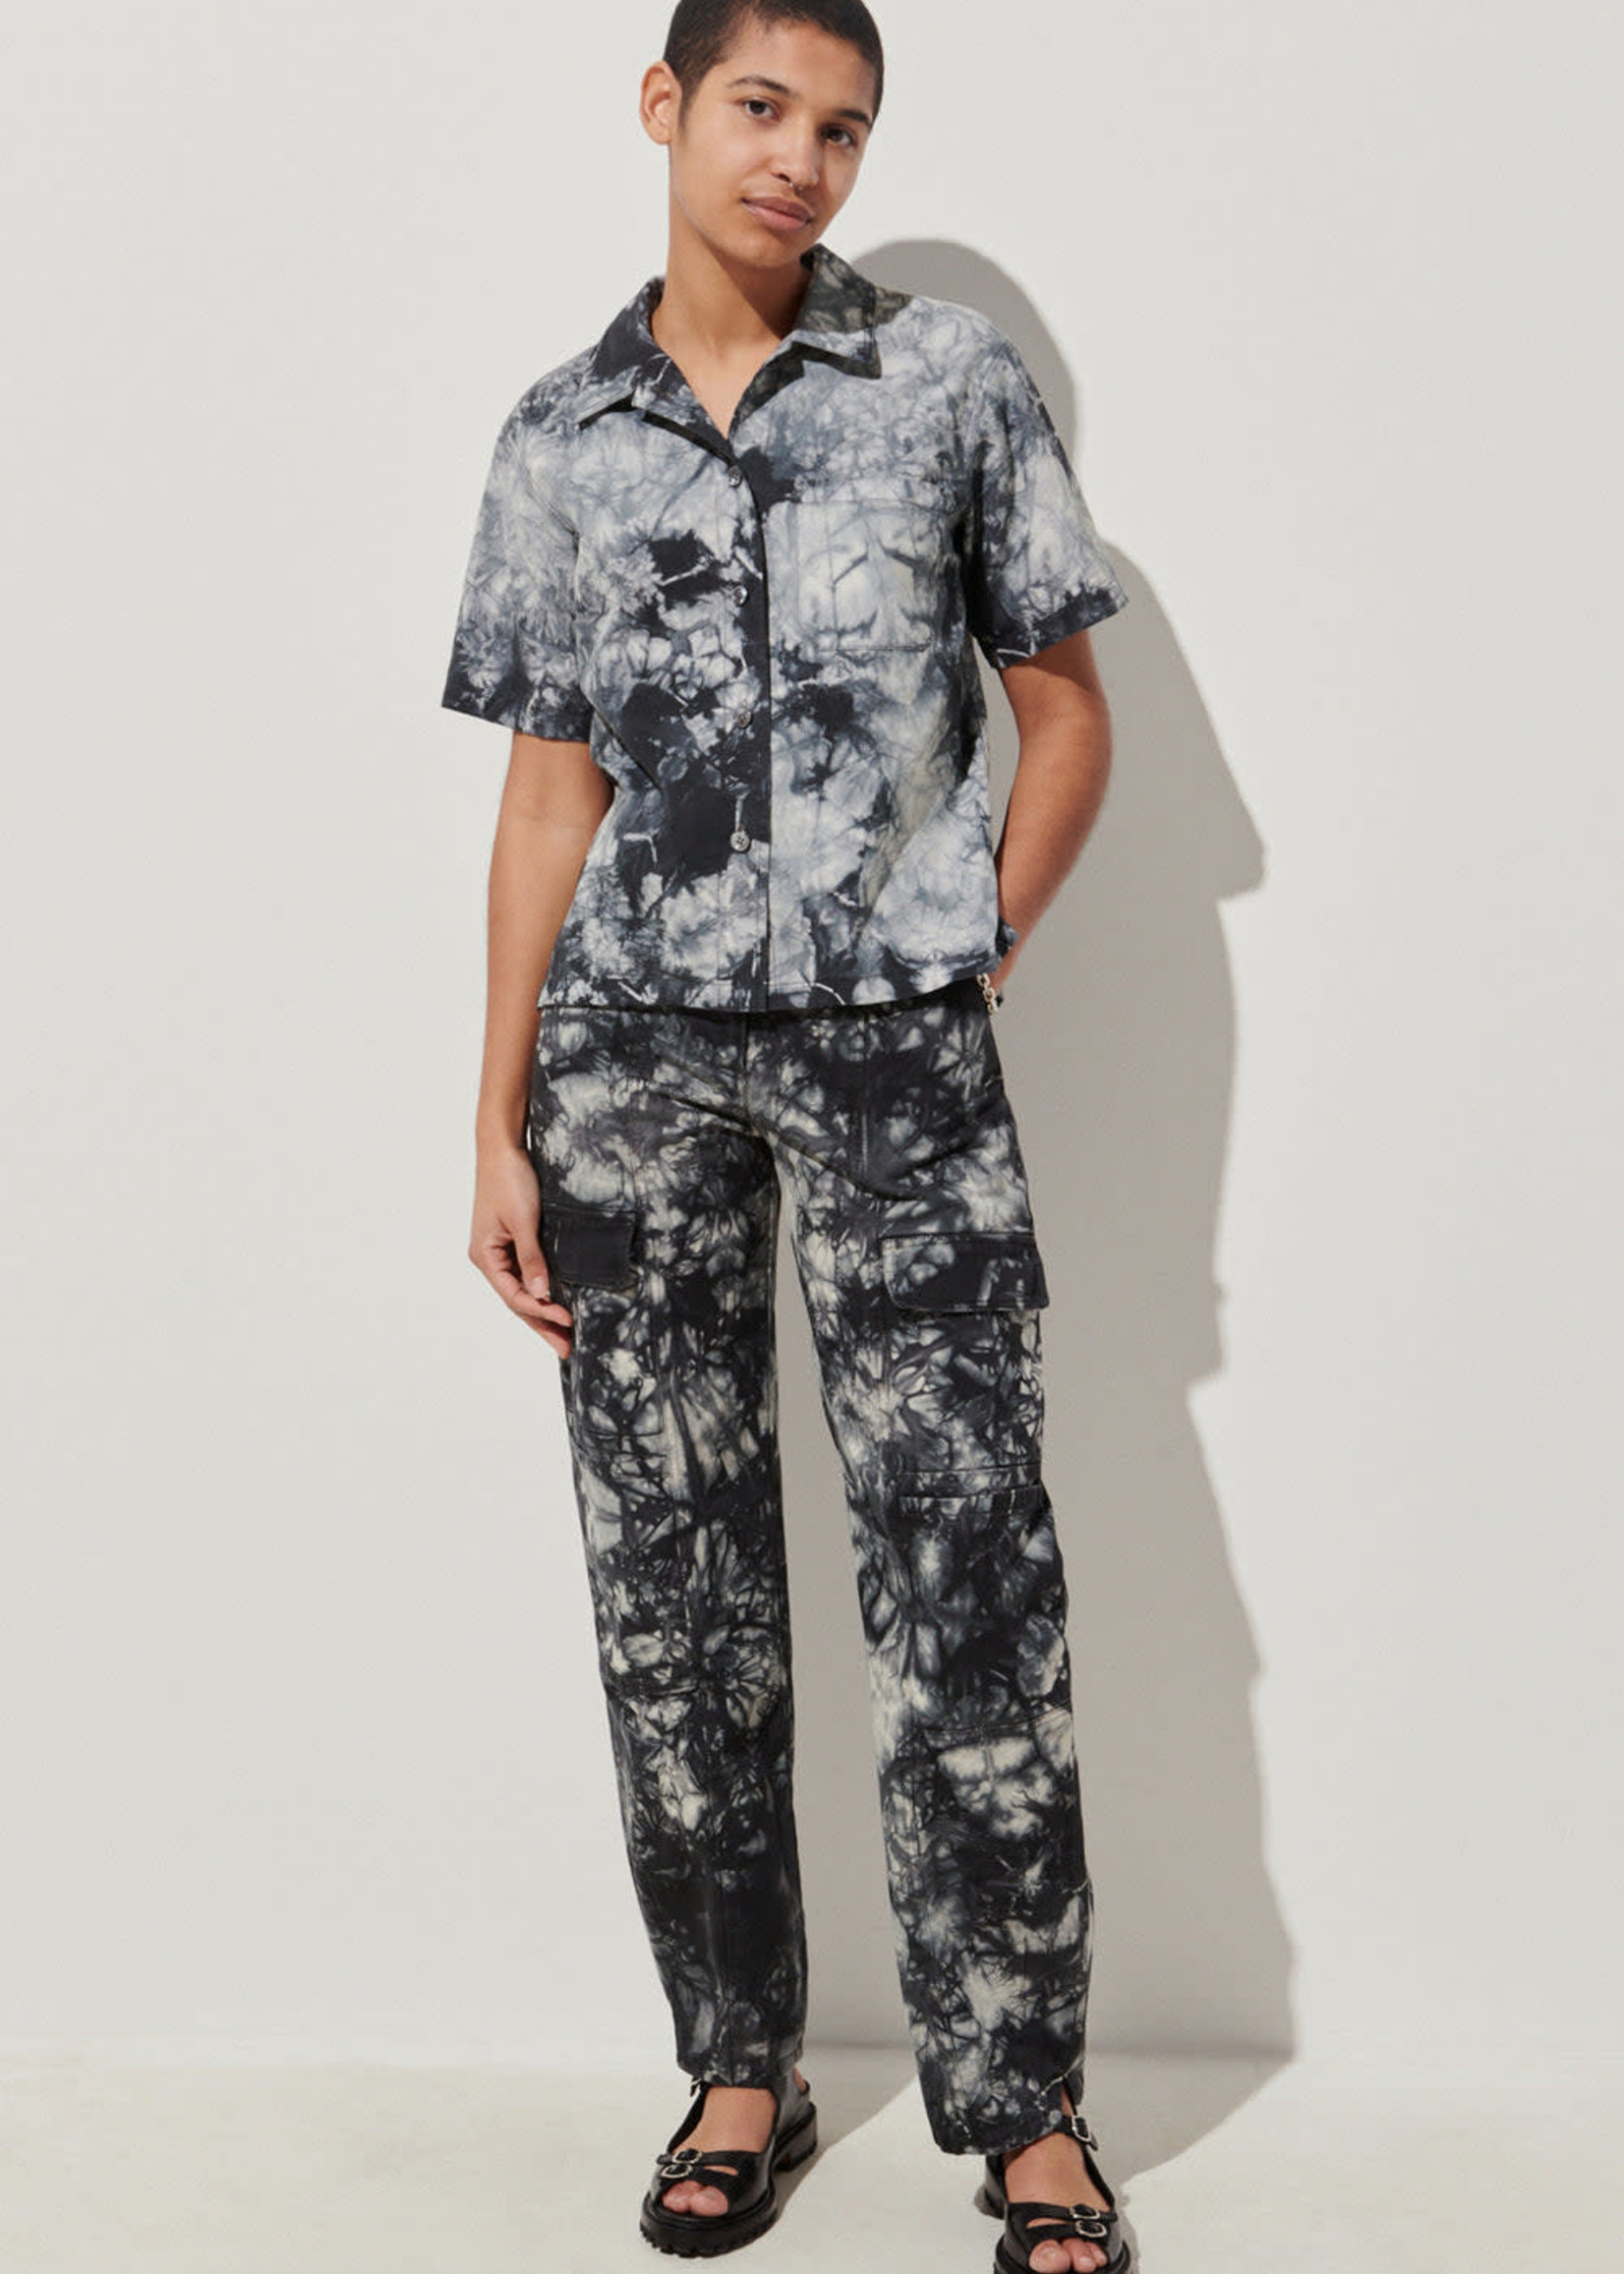 Rachel Comey Soffio Tie Dyed Shirt in Grey and Black